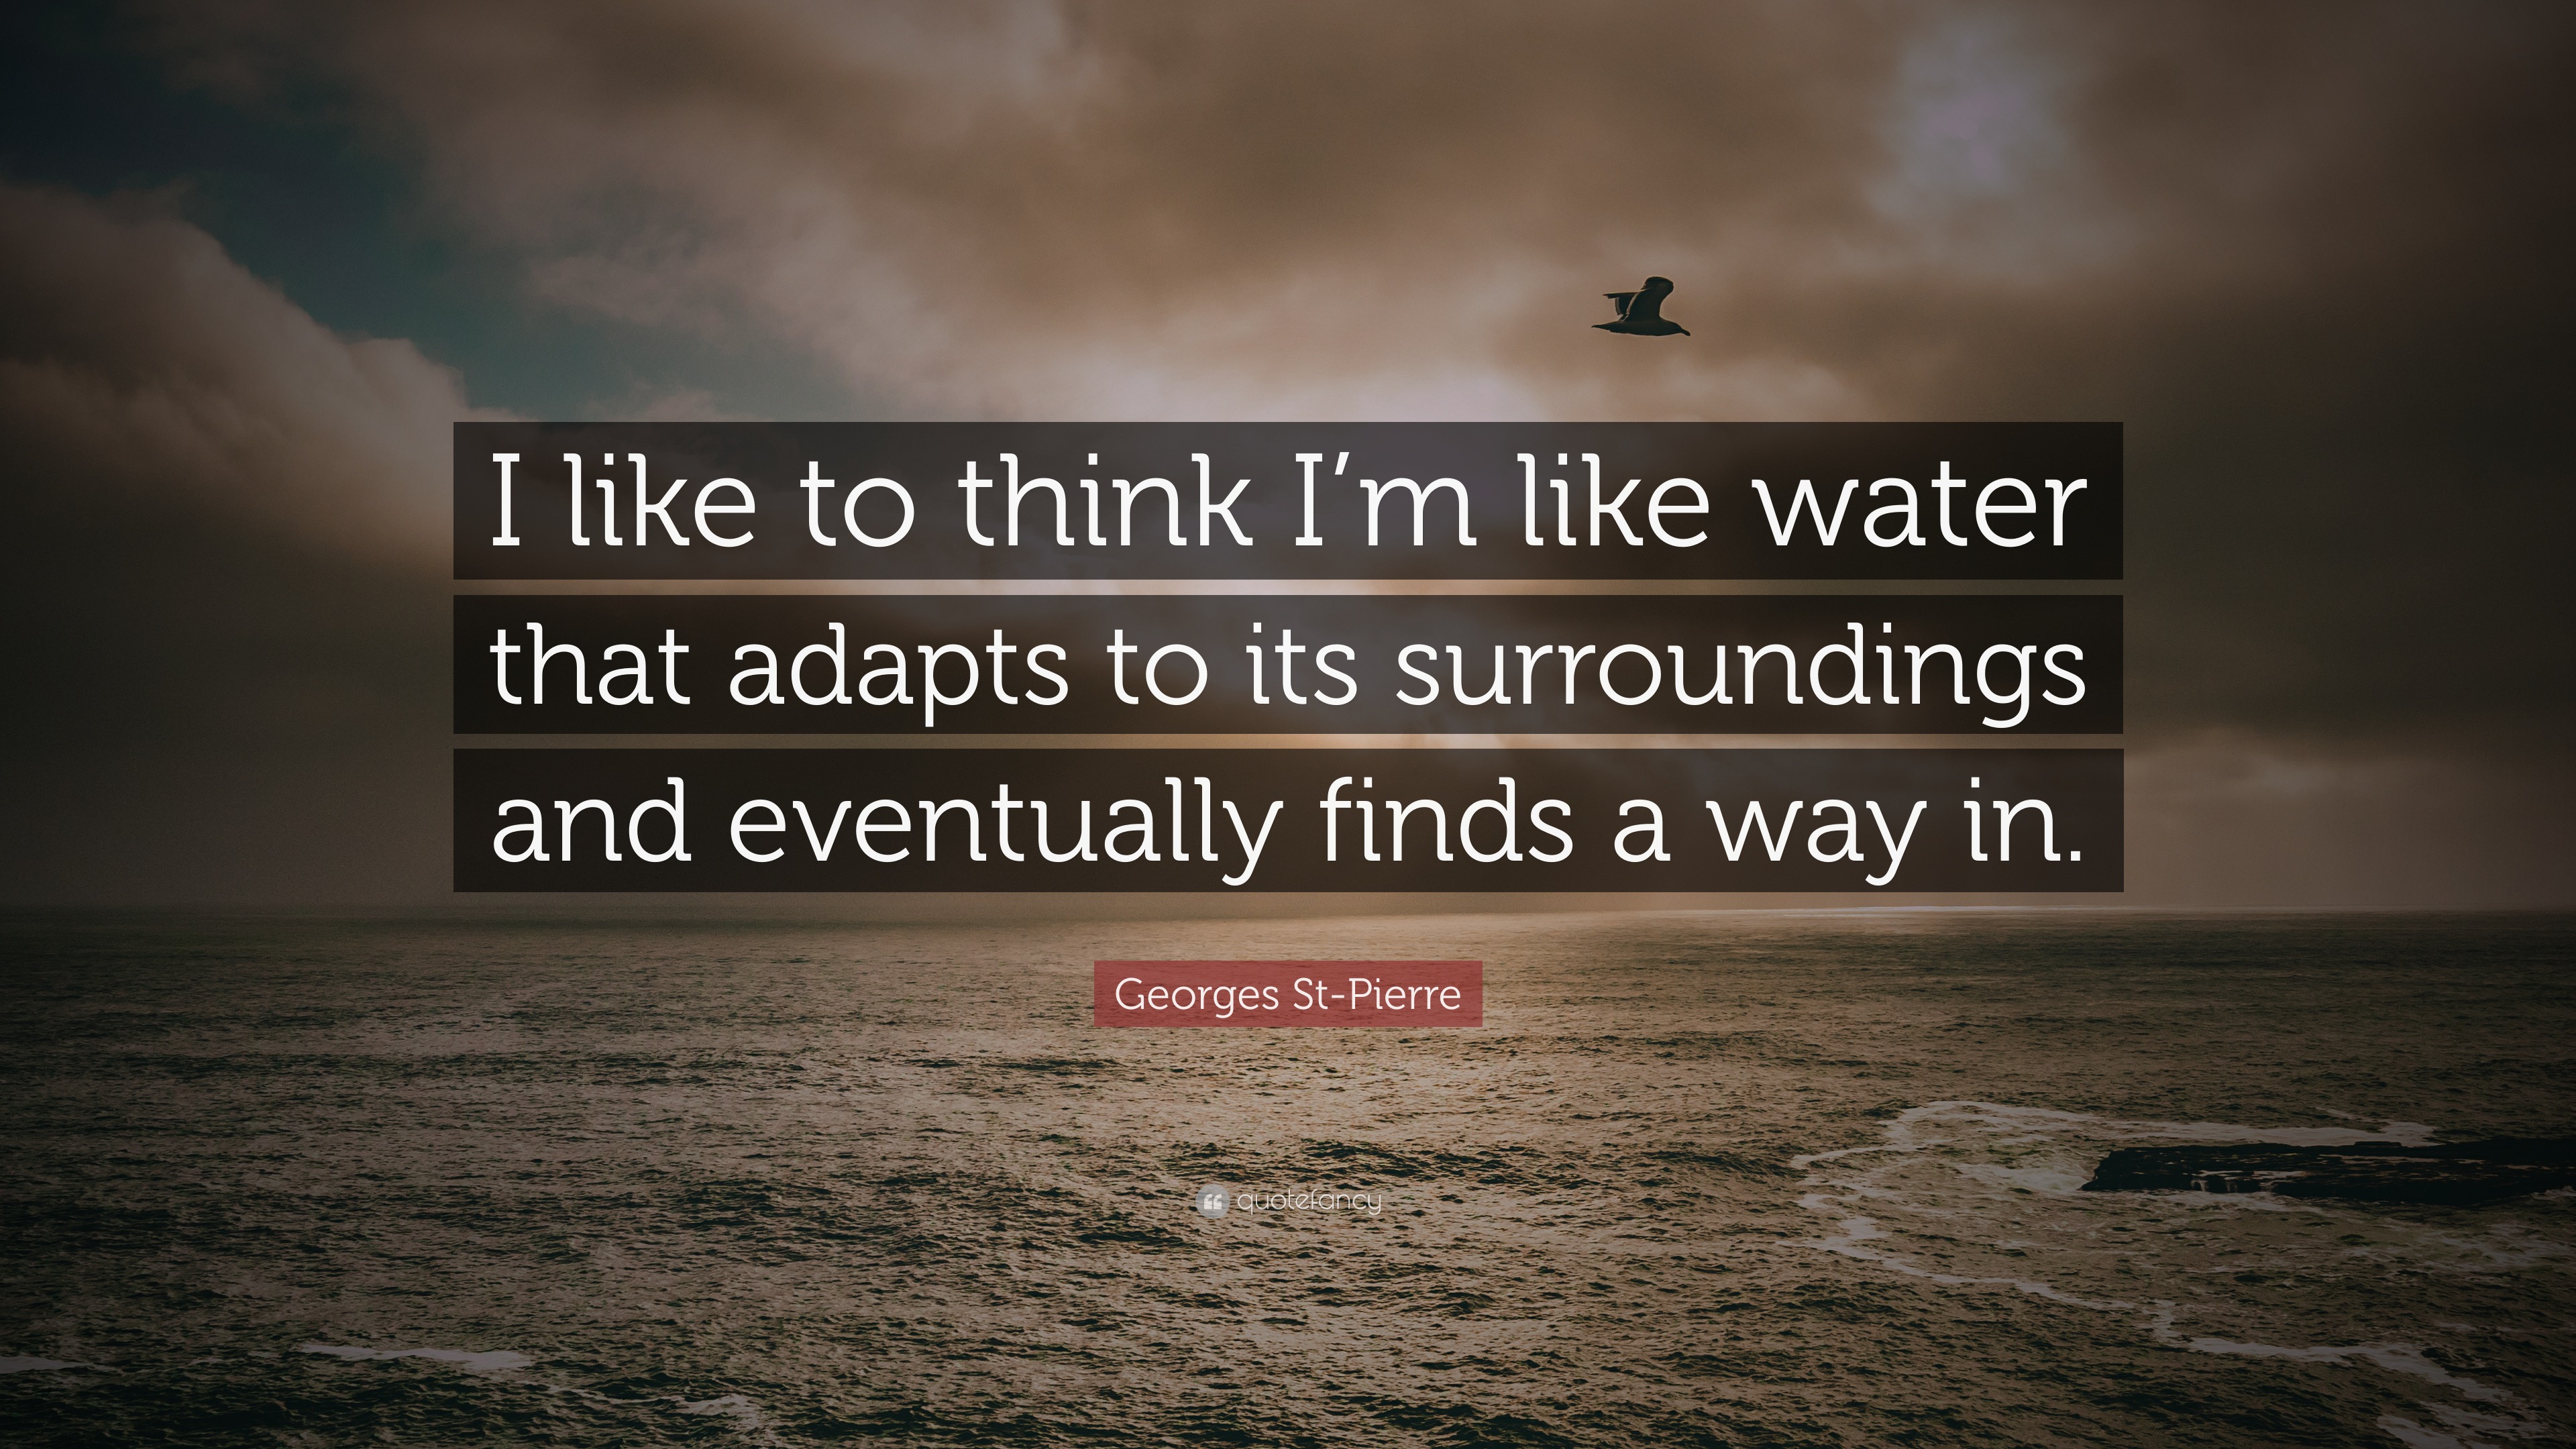 https://quotefancy.com/media/wallpaper/3840x2160/2523717-Georges-St-Pierre-Quote-I-like-to-think-I-m-like-water-that-adapts.jpg